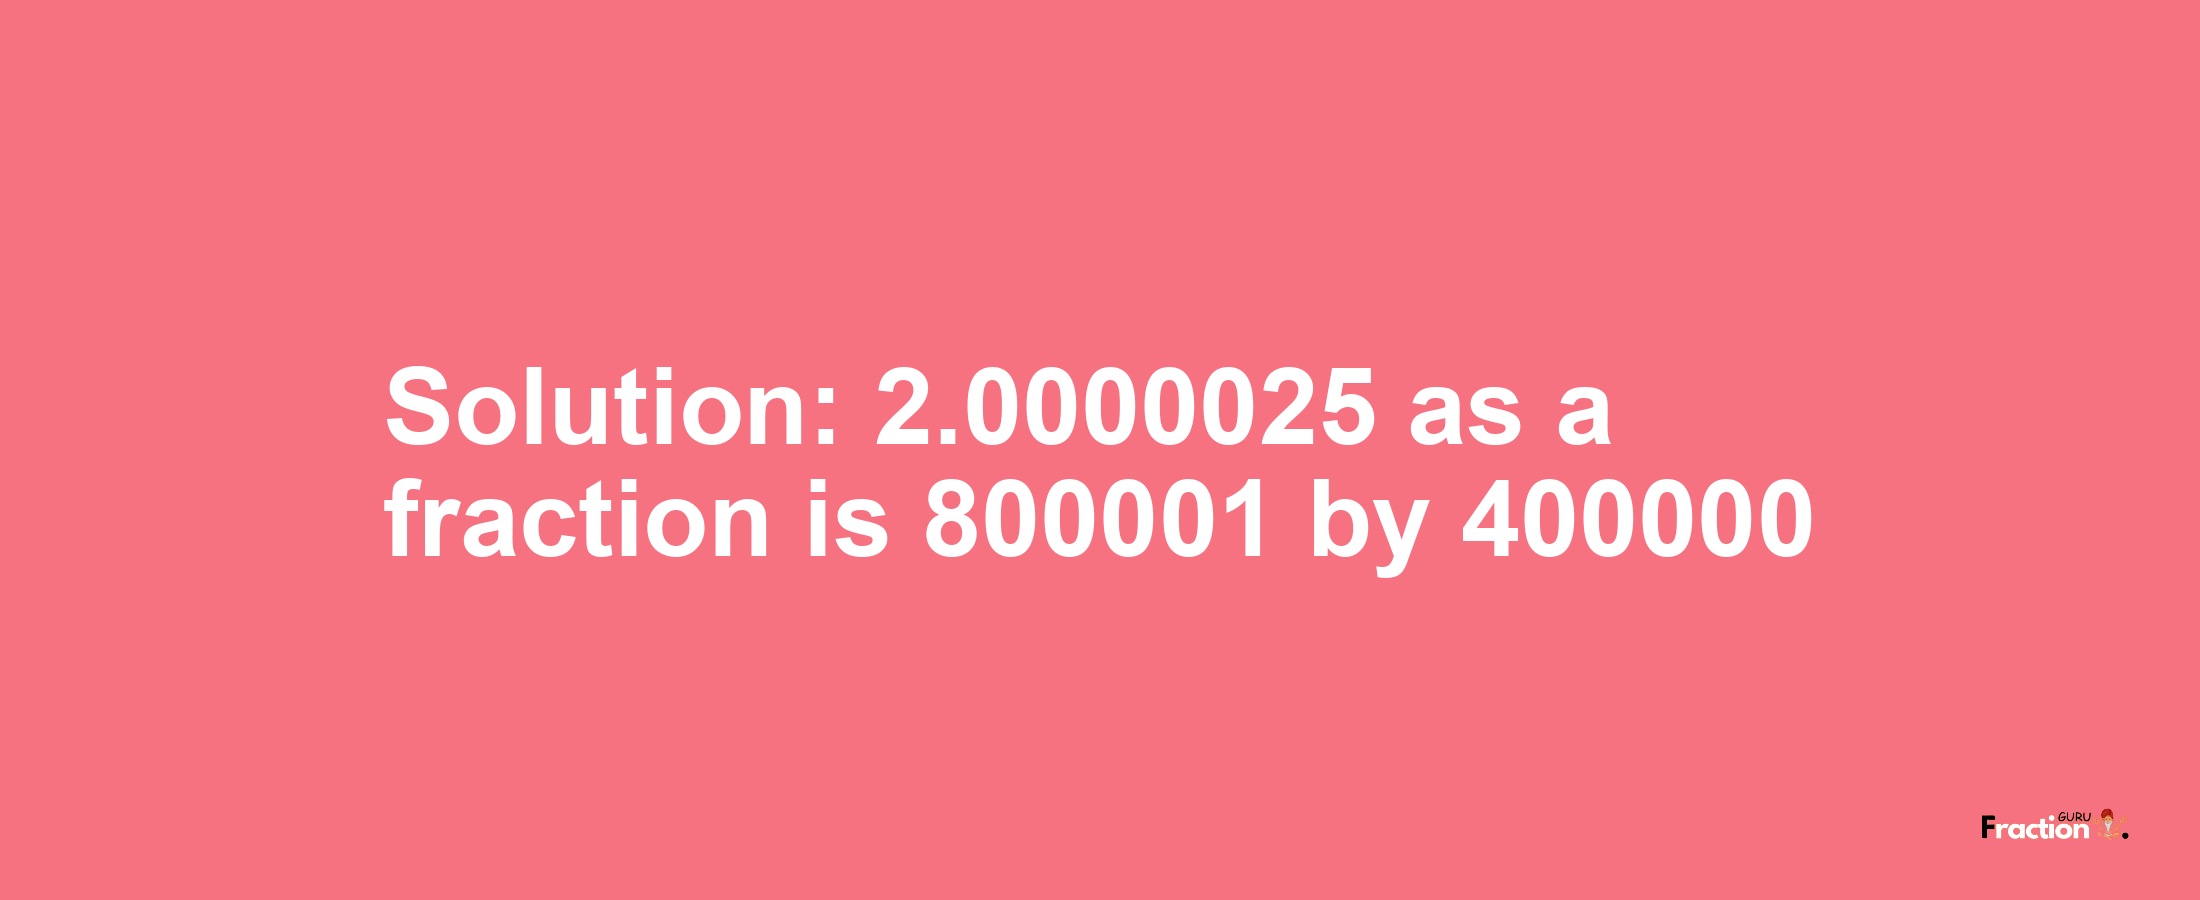 Solution:2.0000025 as a fraction is 800001/400000